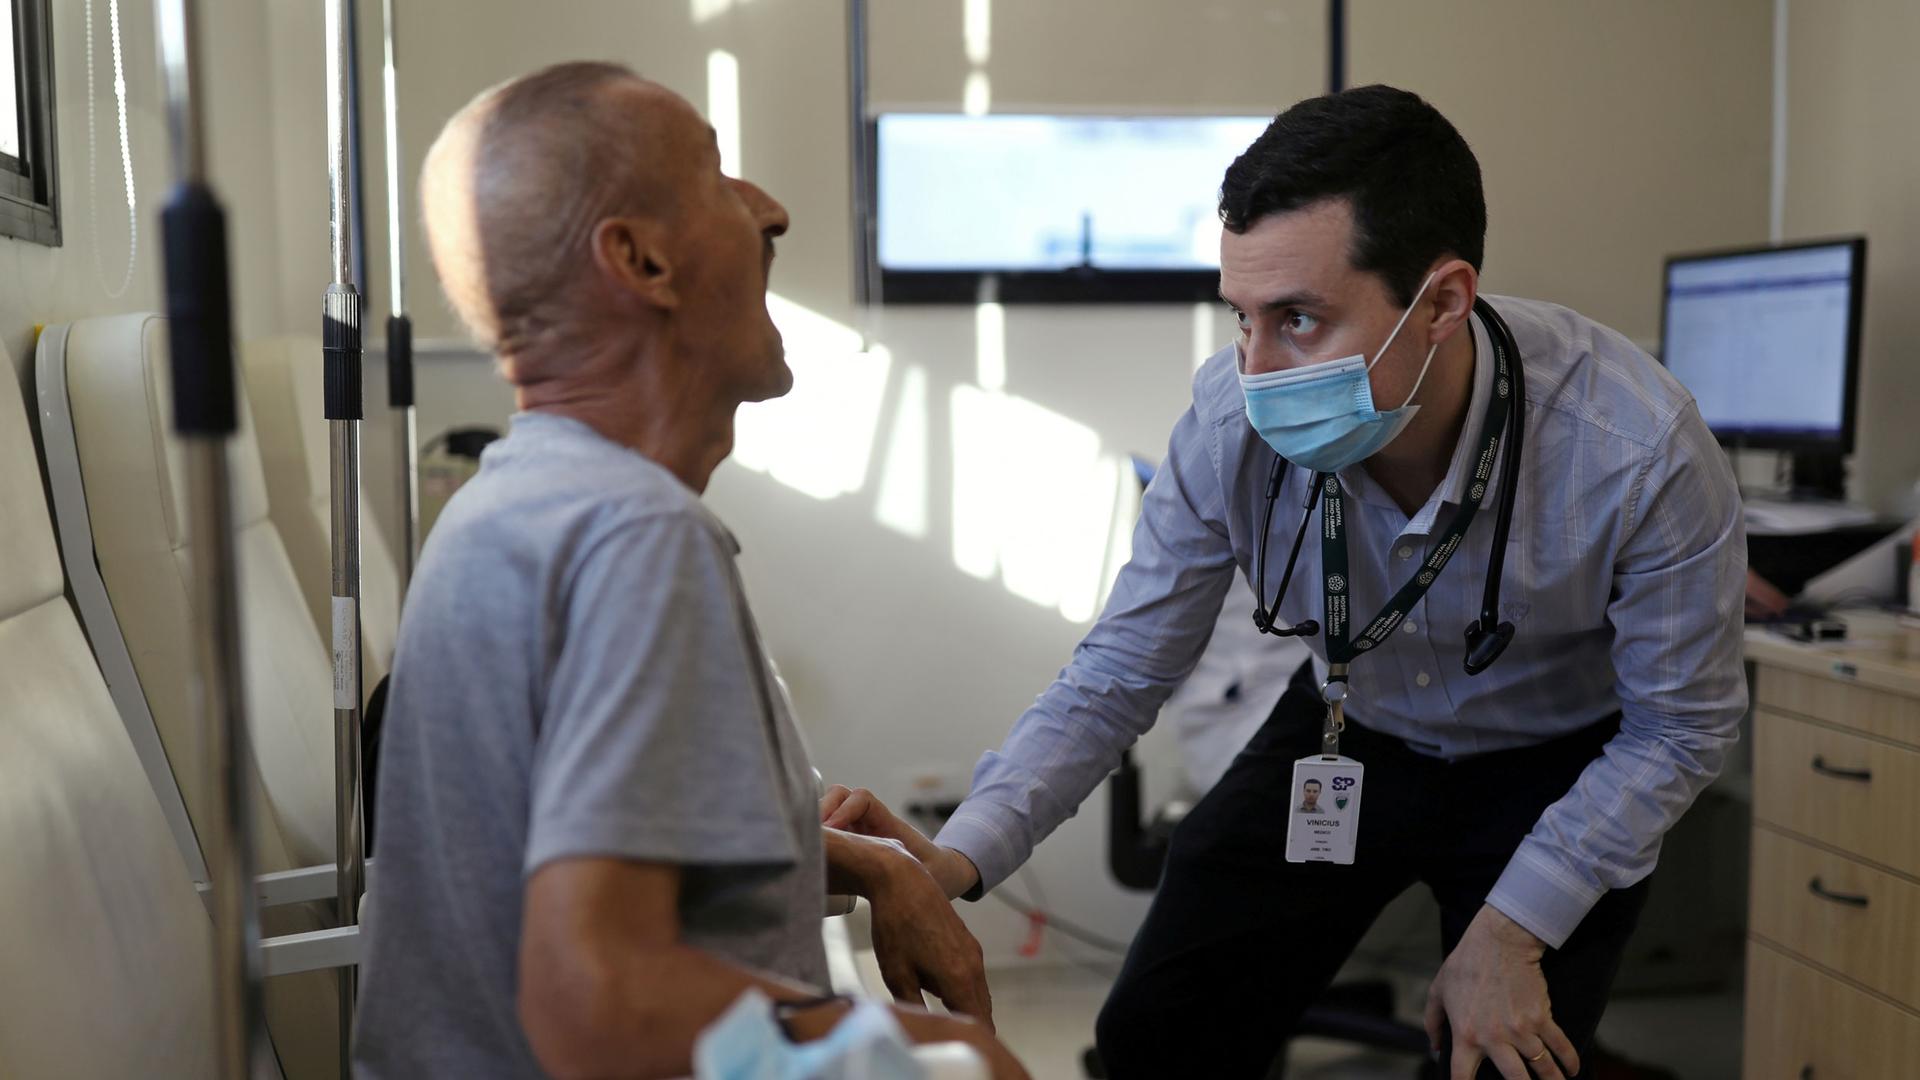 An older man is shown seated and with his mouth open wide with a doctor wearing a face mask looking into his mouth.